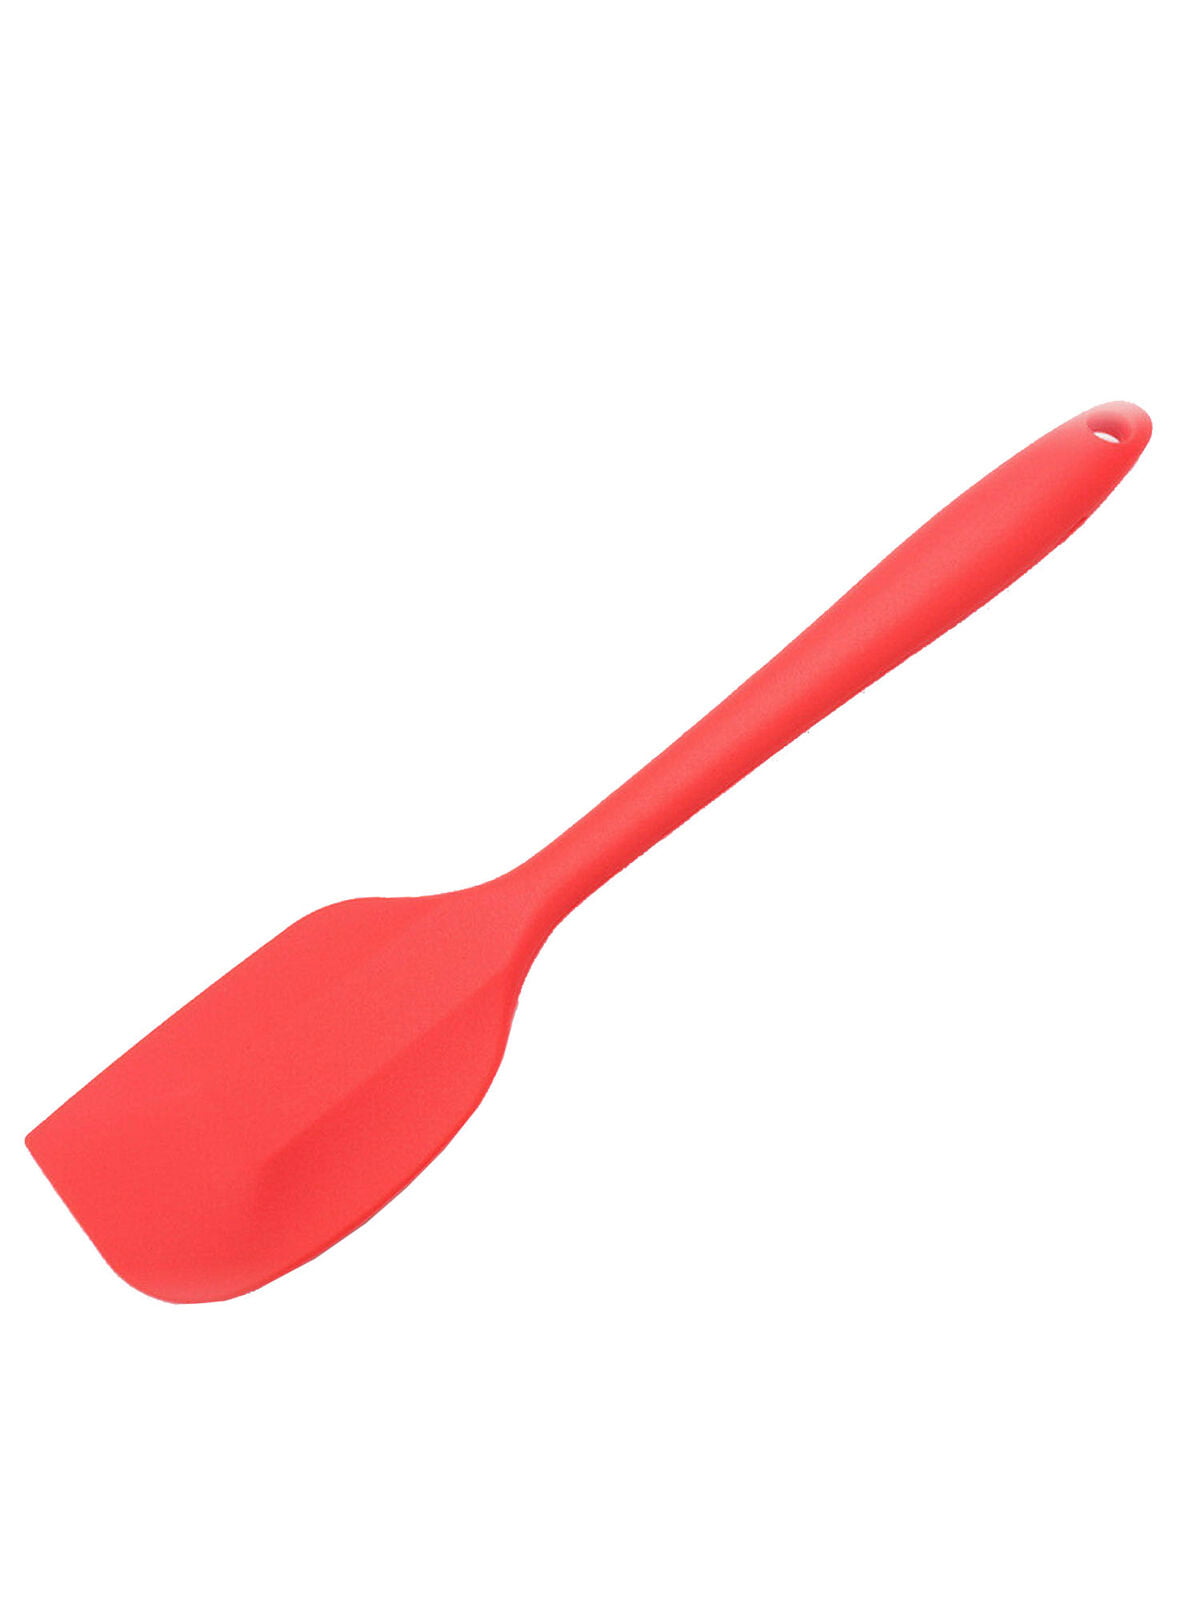 Black and Red 2pcs Silicone Spatulas Baking and Mixing 447℉ Heat Resistant Seamless Spatulas Non-Stick Rubber Spatulas Cake Cream Butter Spatula for Cooking